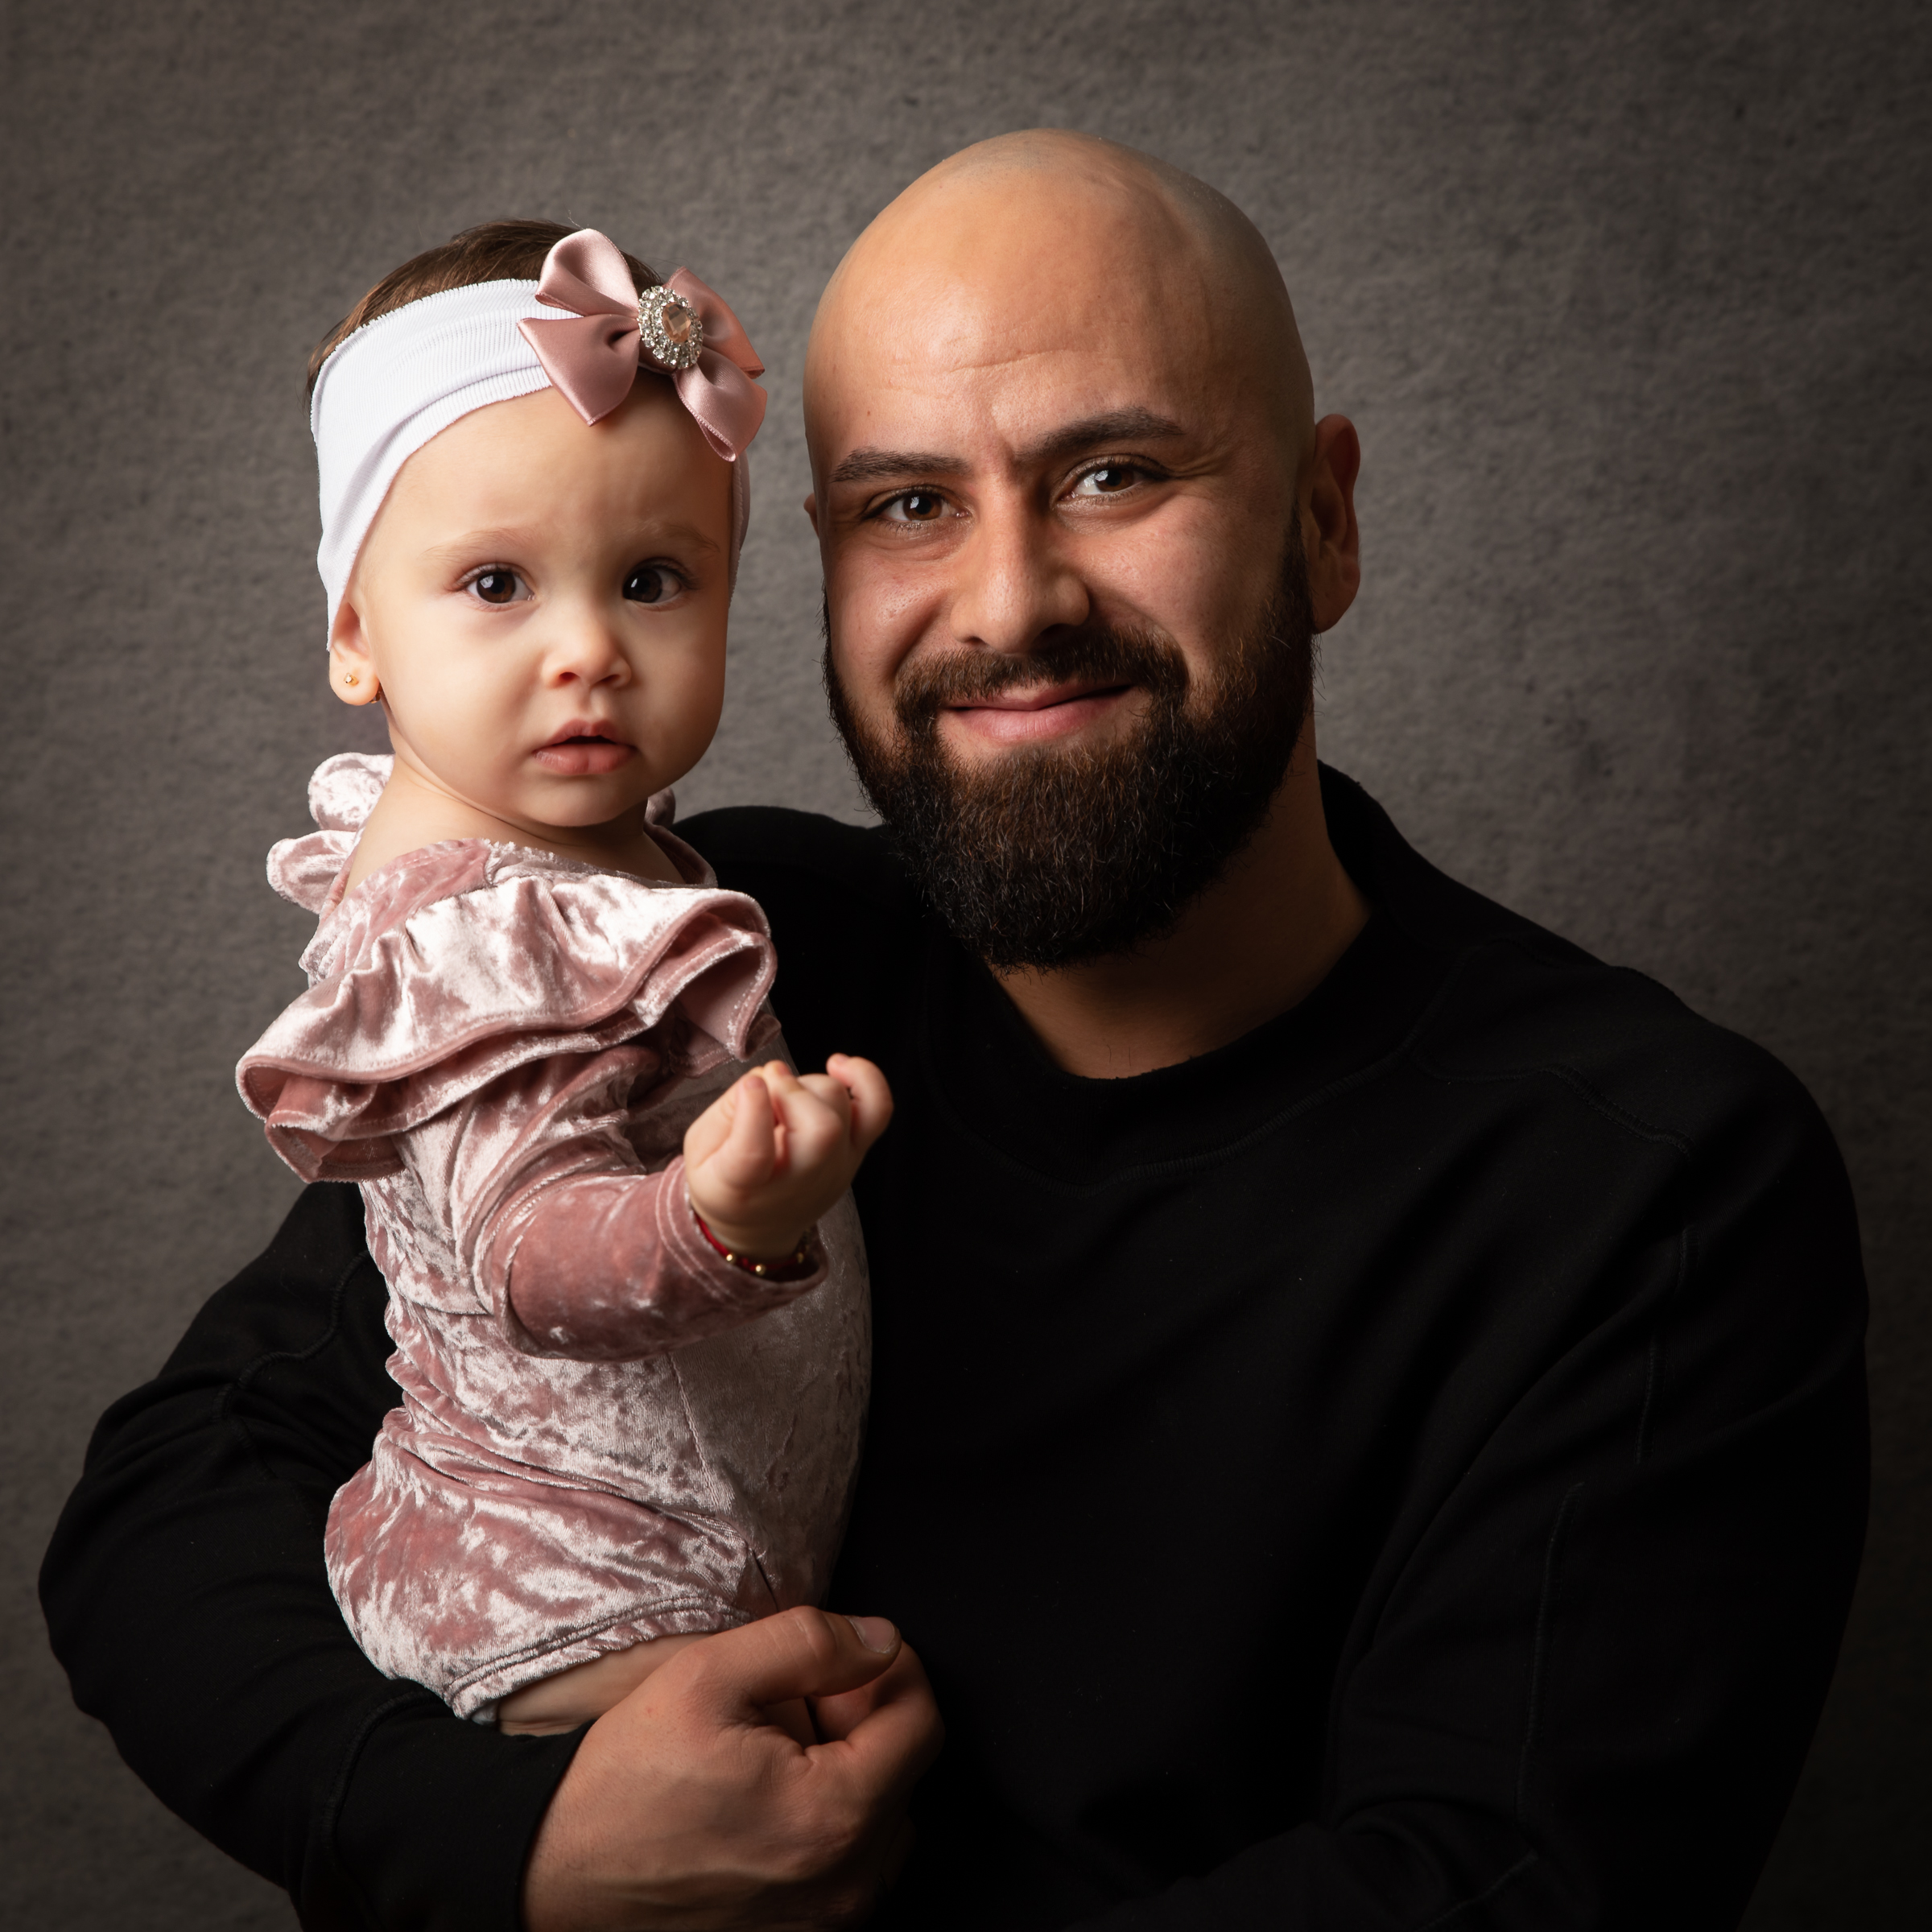 father-baby-daughter-portrait-east-london.jpg